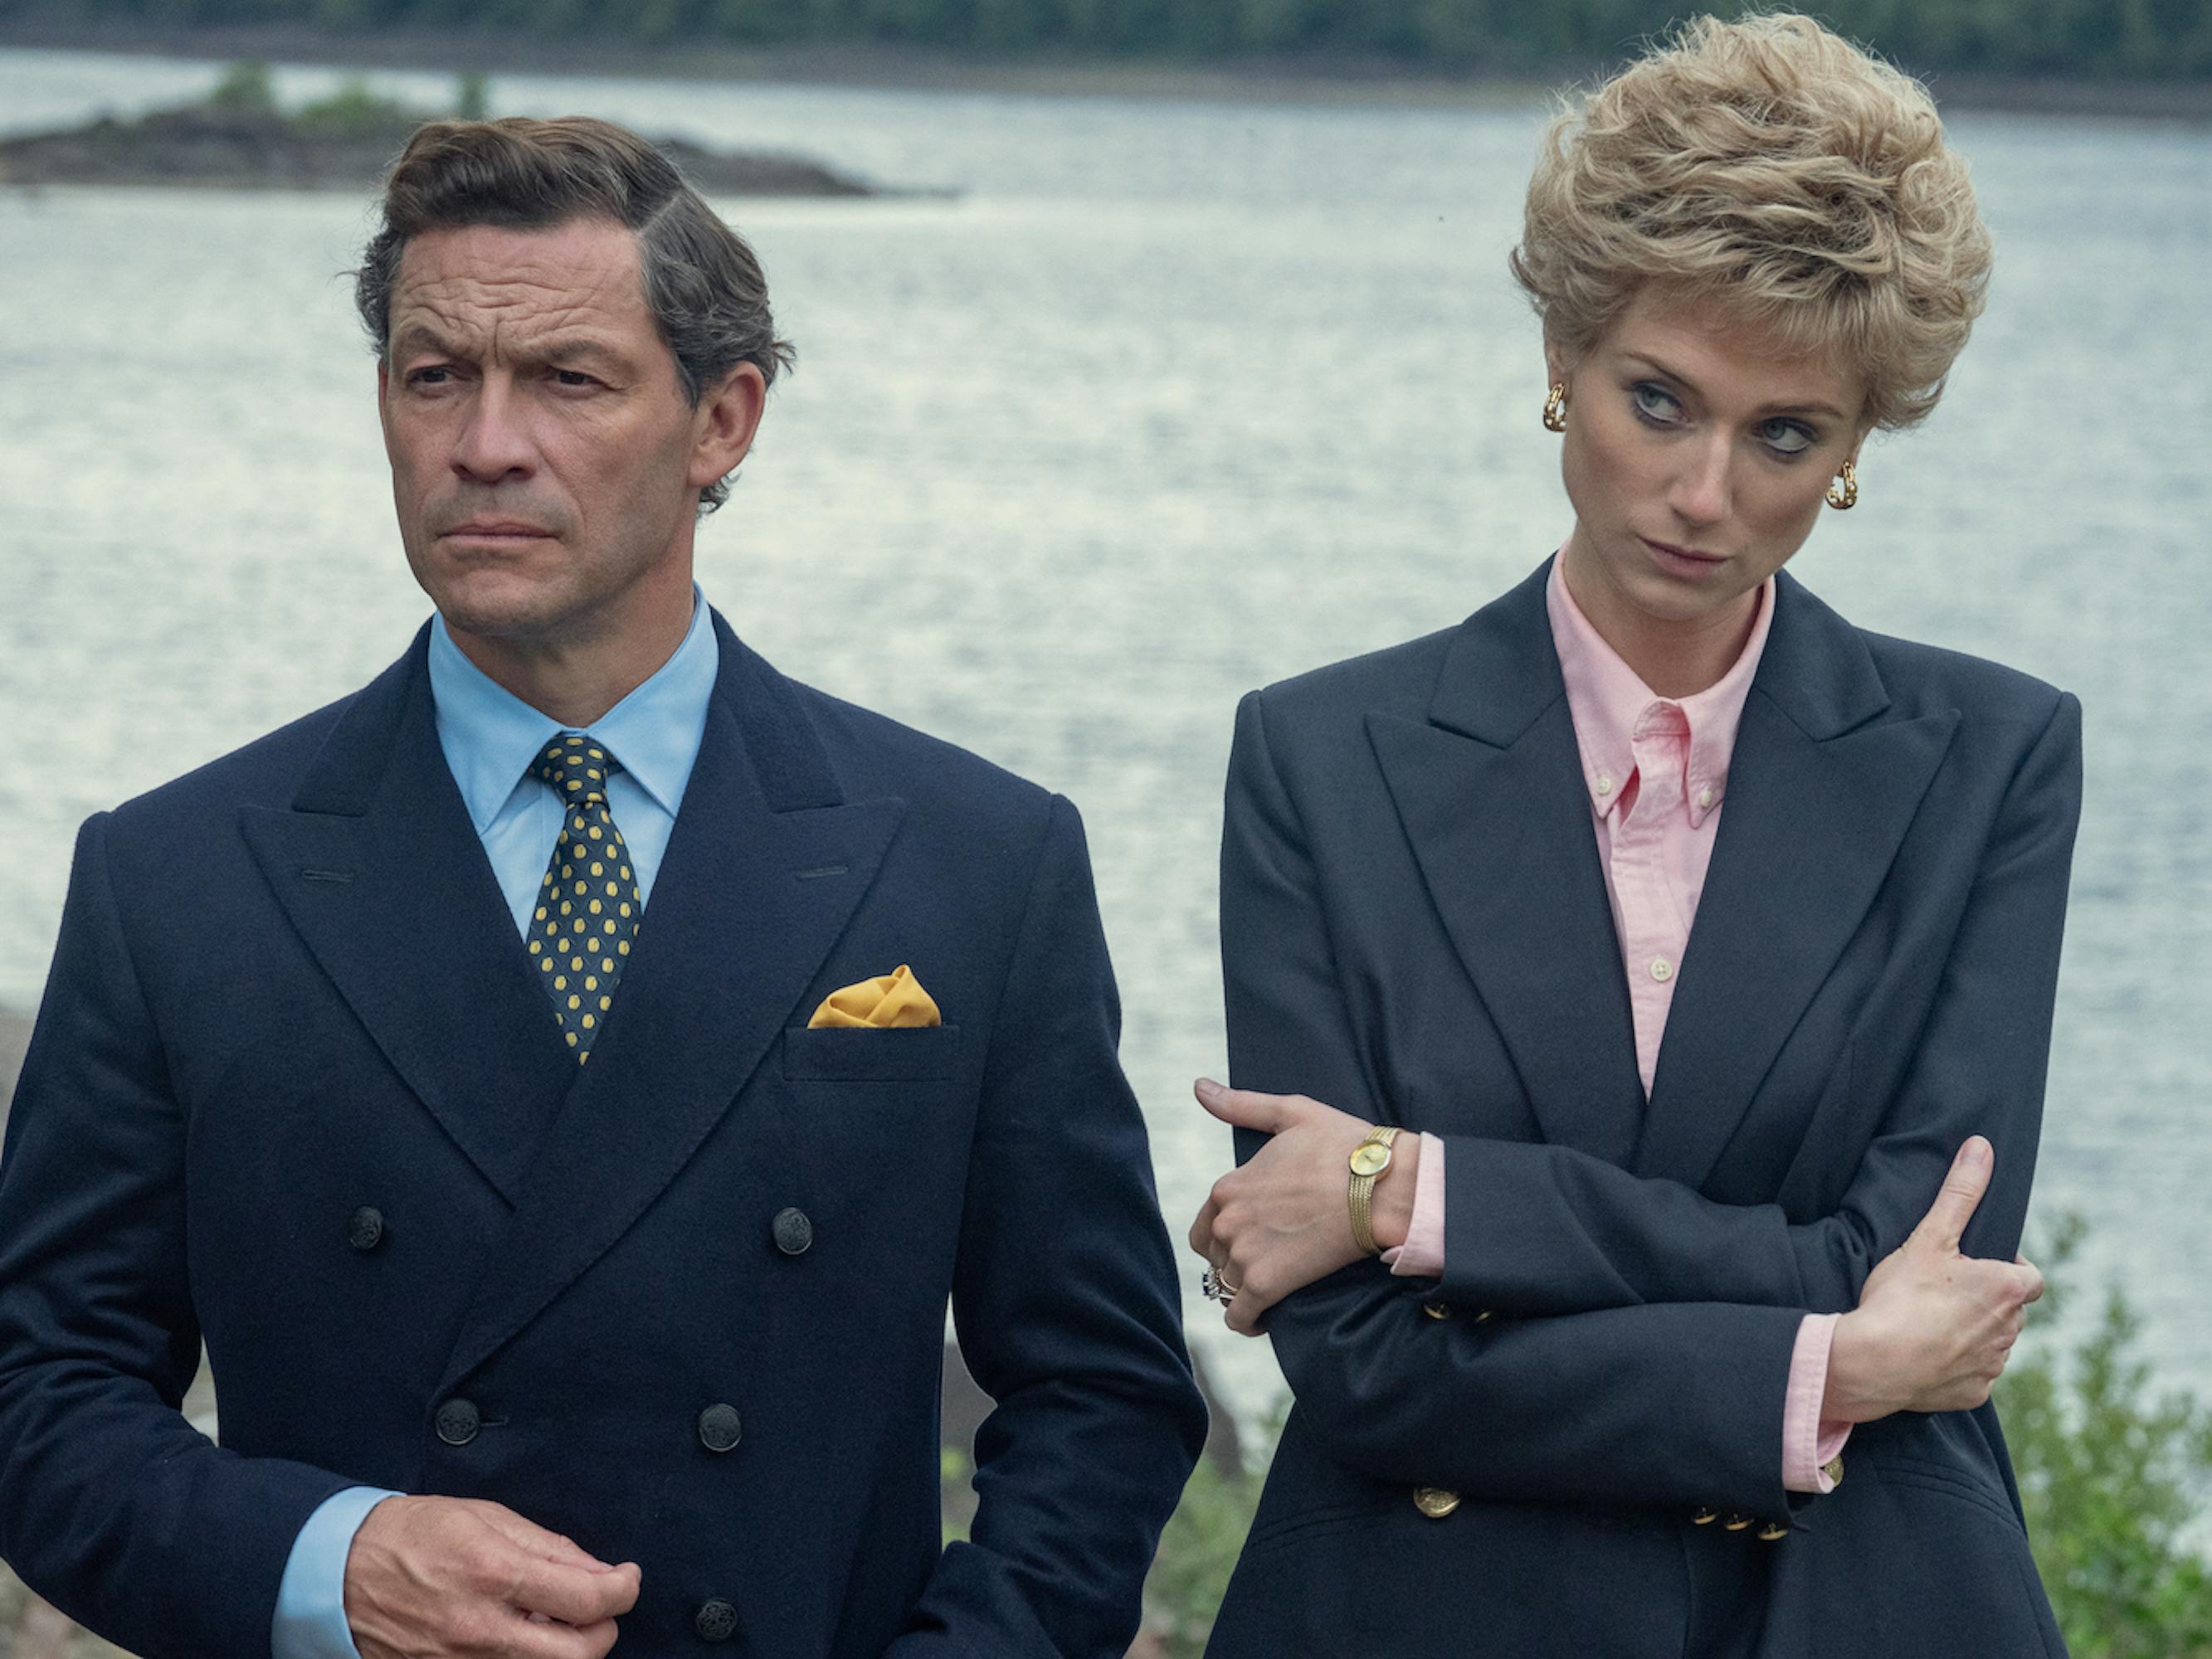 Prince Charles (Dominic West) and Princess Diana (Elizabeth Debicki) wear navy blazers and stand by some water.